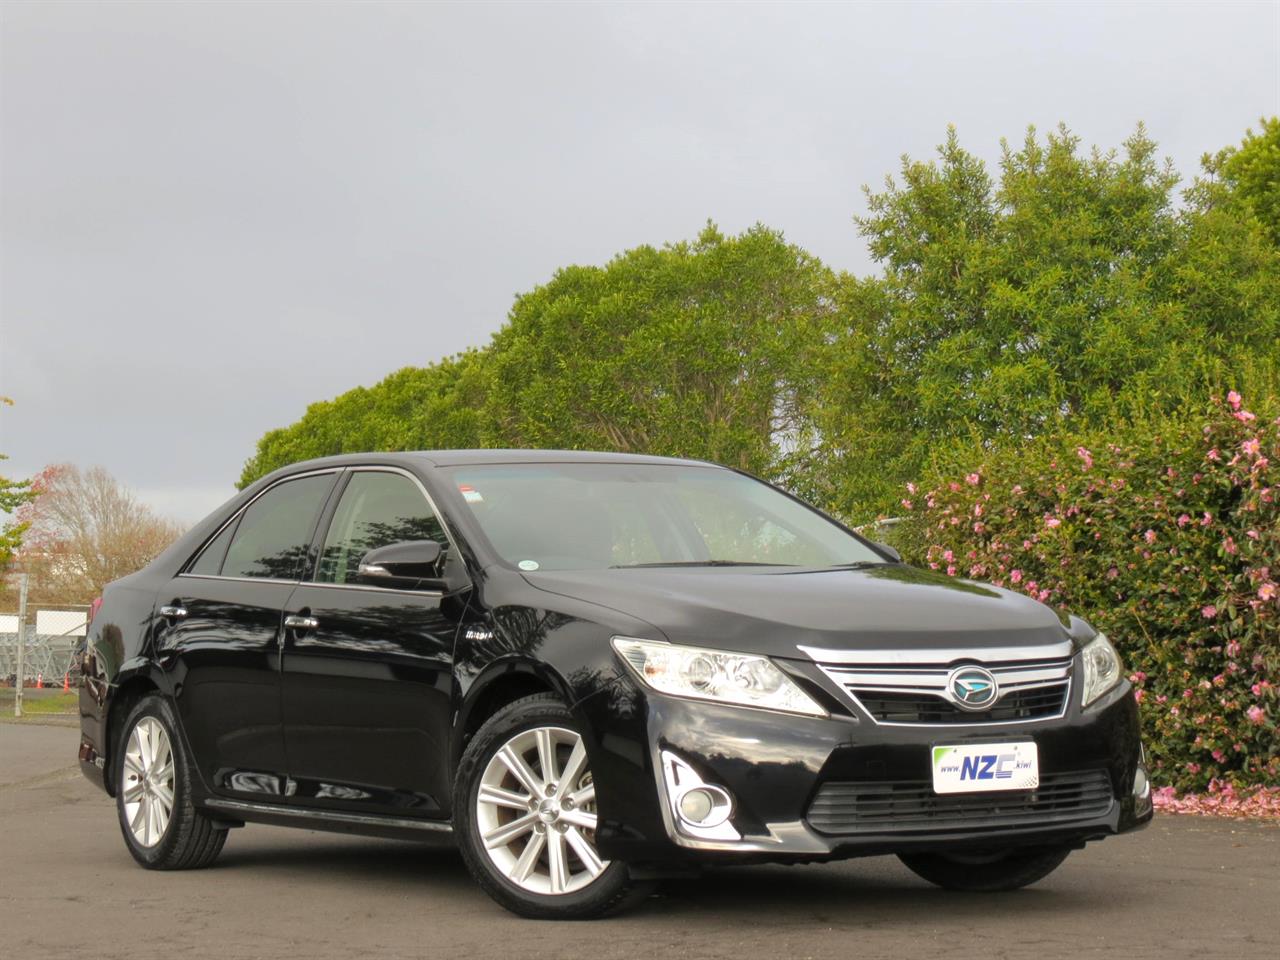 NZC 2013 Toyota Camry just arrived to Auckland